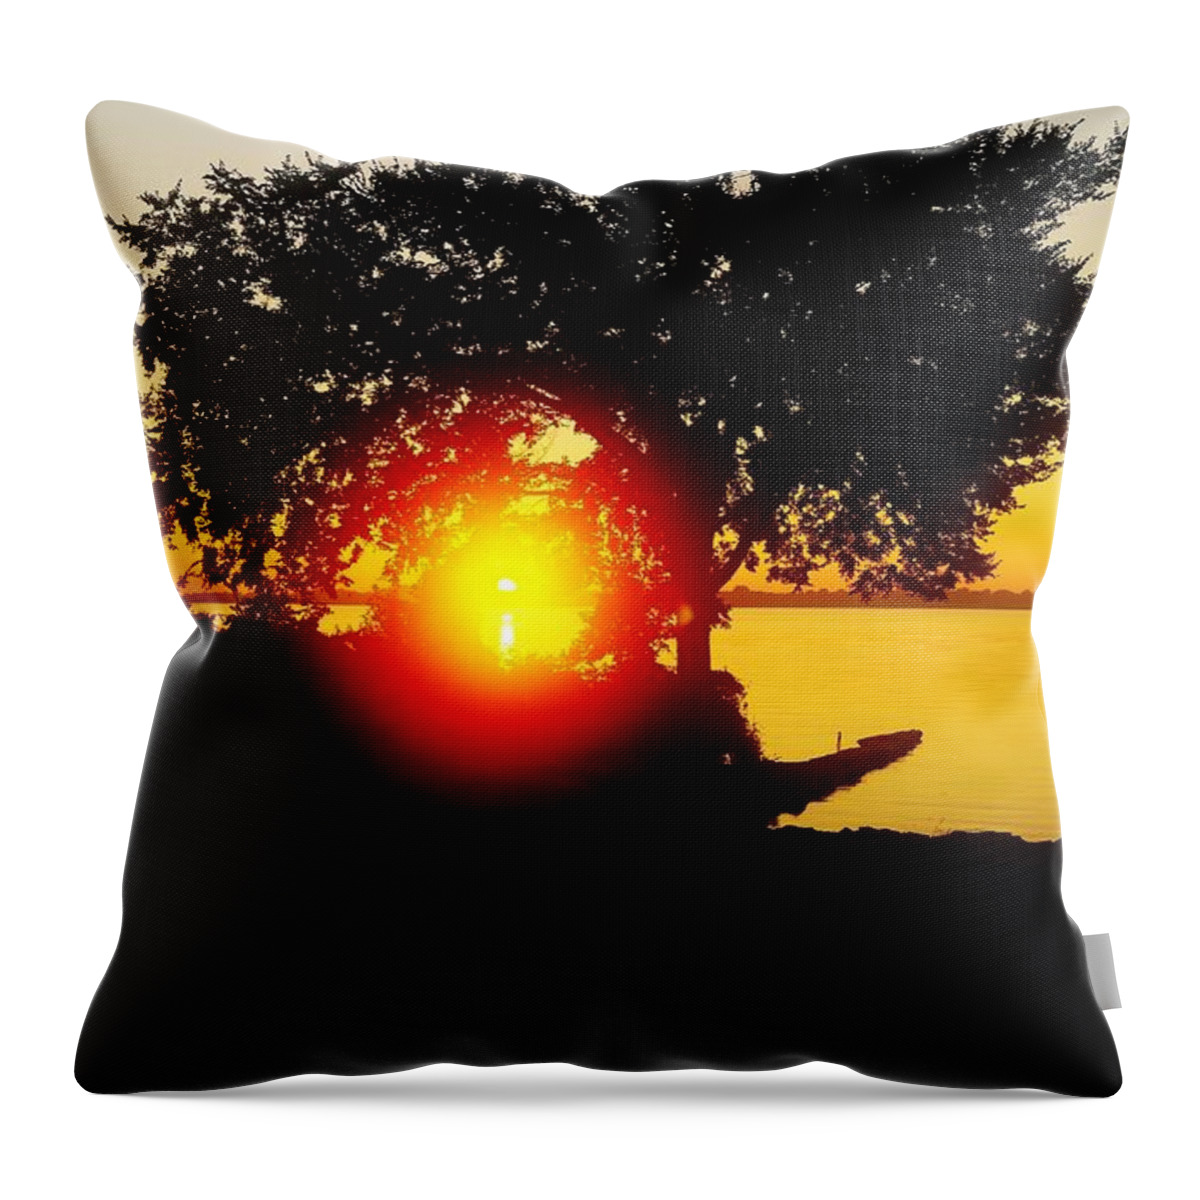 Sunrise Throw Pillow featuring the photograph Dawn tween The Trees by Daniel Thompson